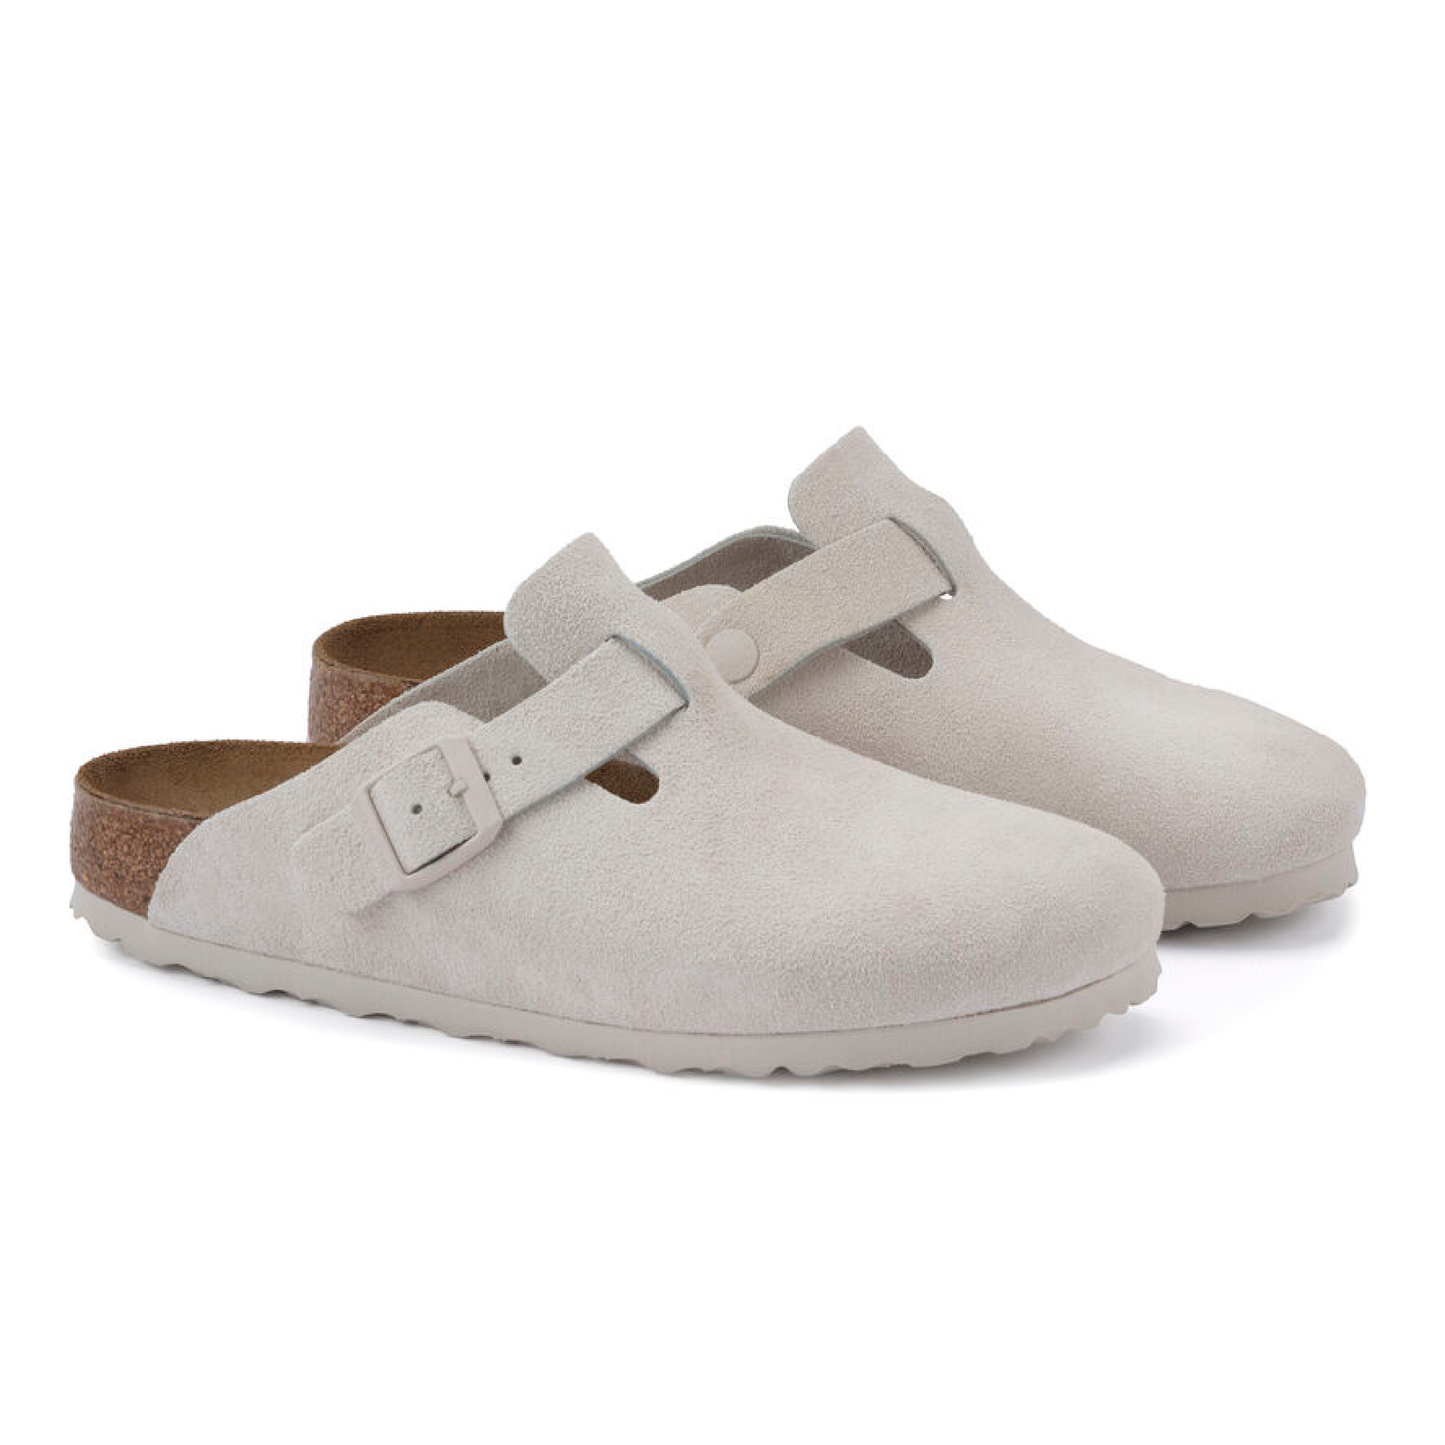 Boston Suede Slippers, Antique White